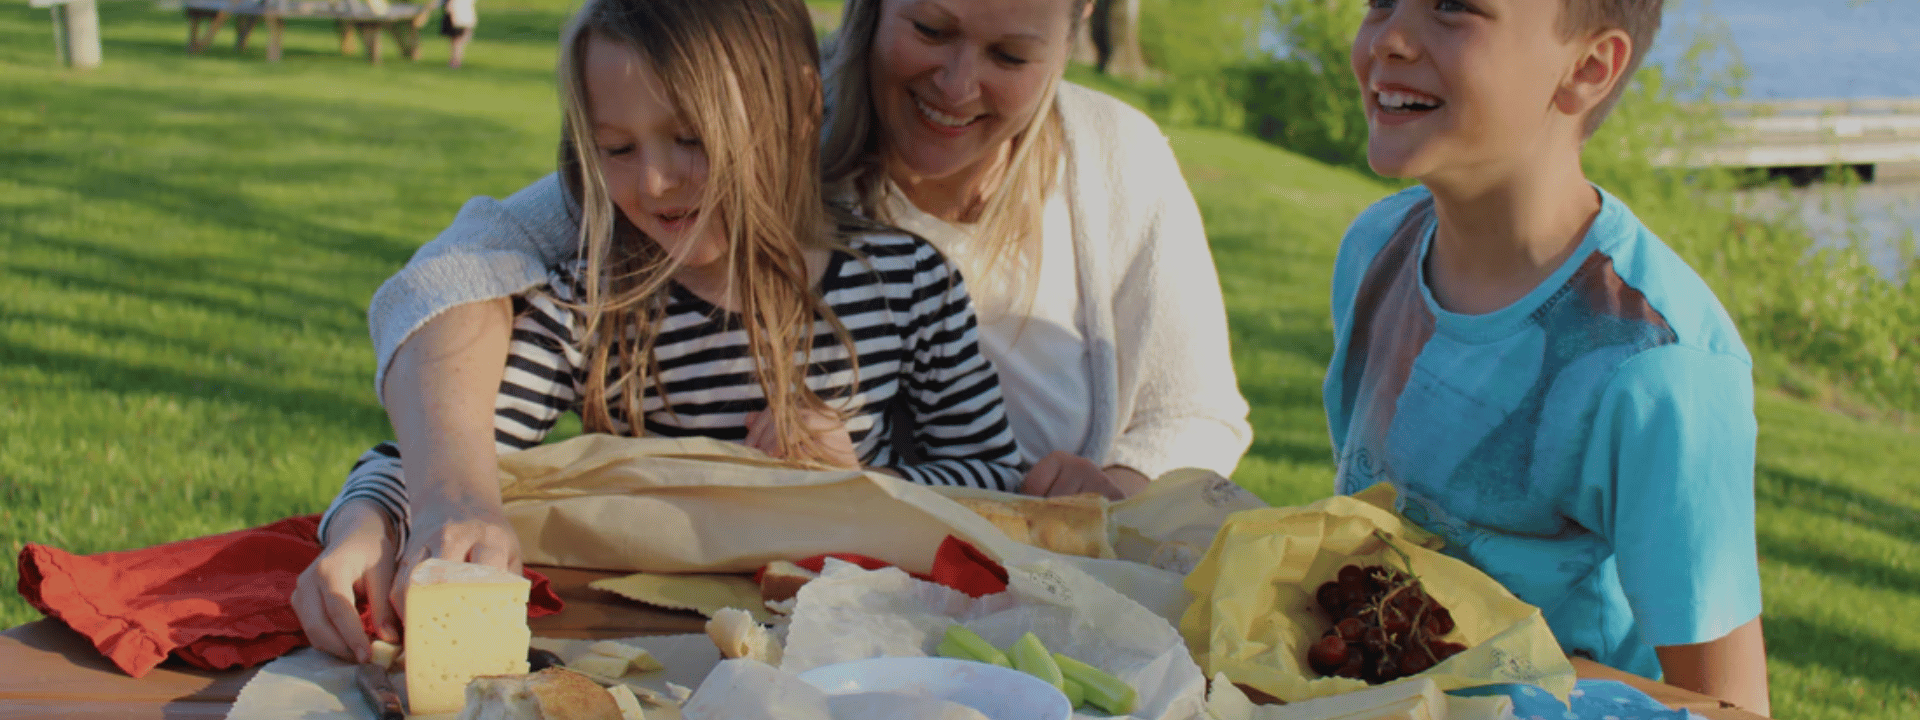 Mother with son and daughter smiling at a picnic table with cheese and fruits wrapped in beeswax wraps